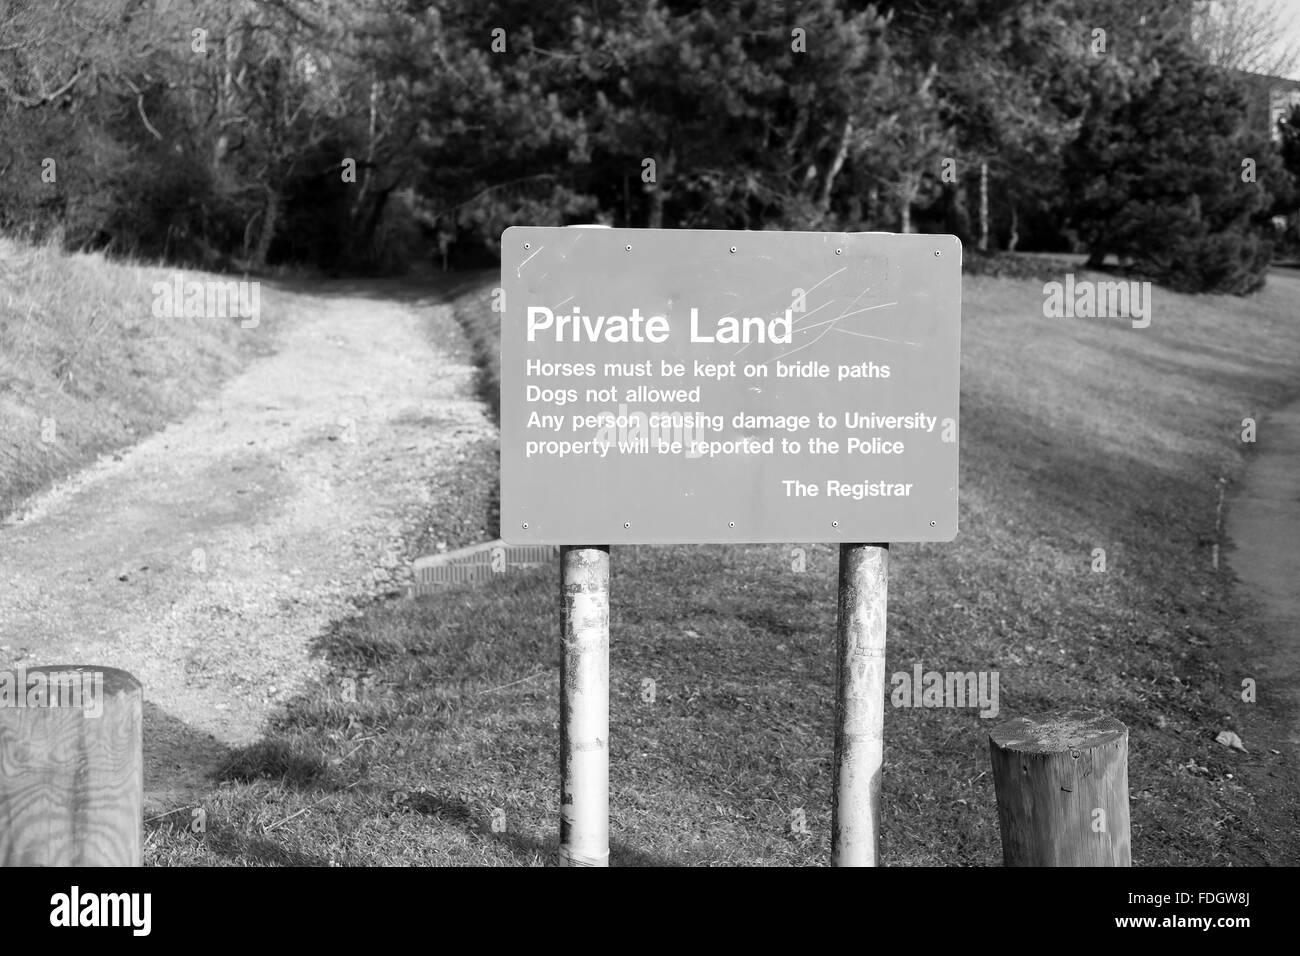 Private land sign, horses kept to bridle paths, Dogs not allowed  January 2016 Stock Photo